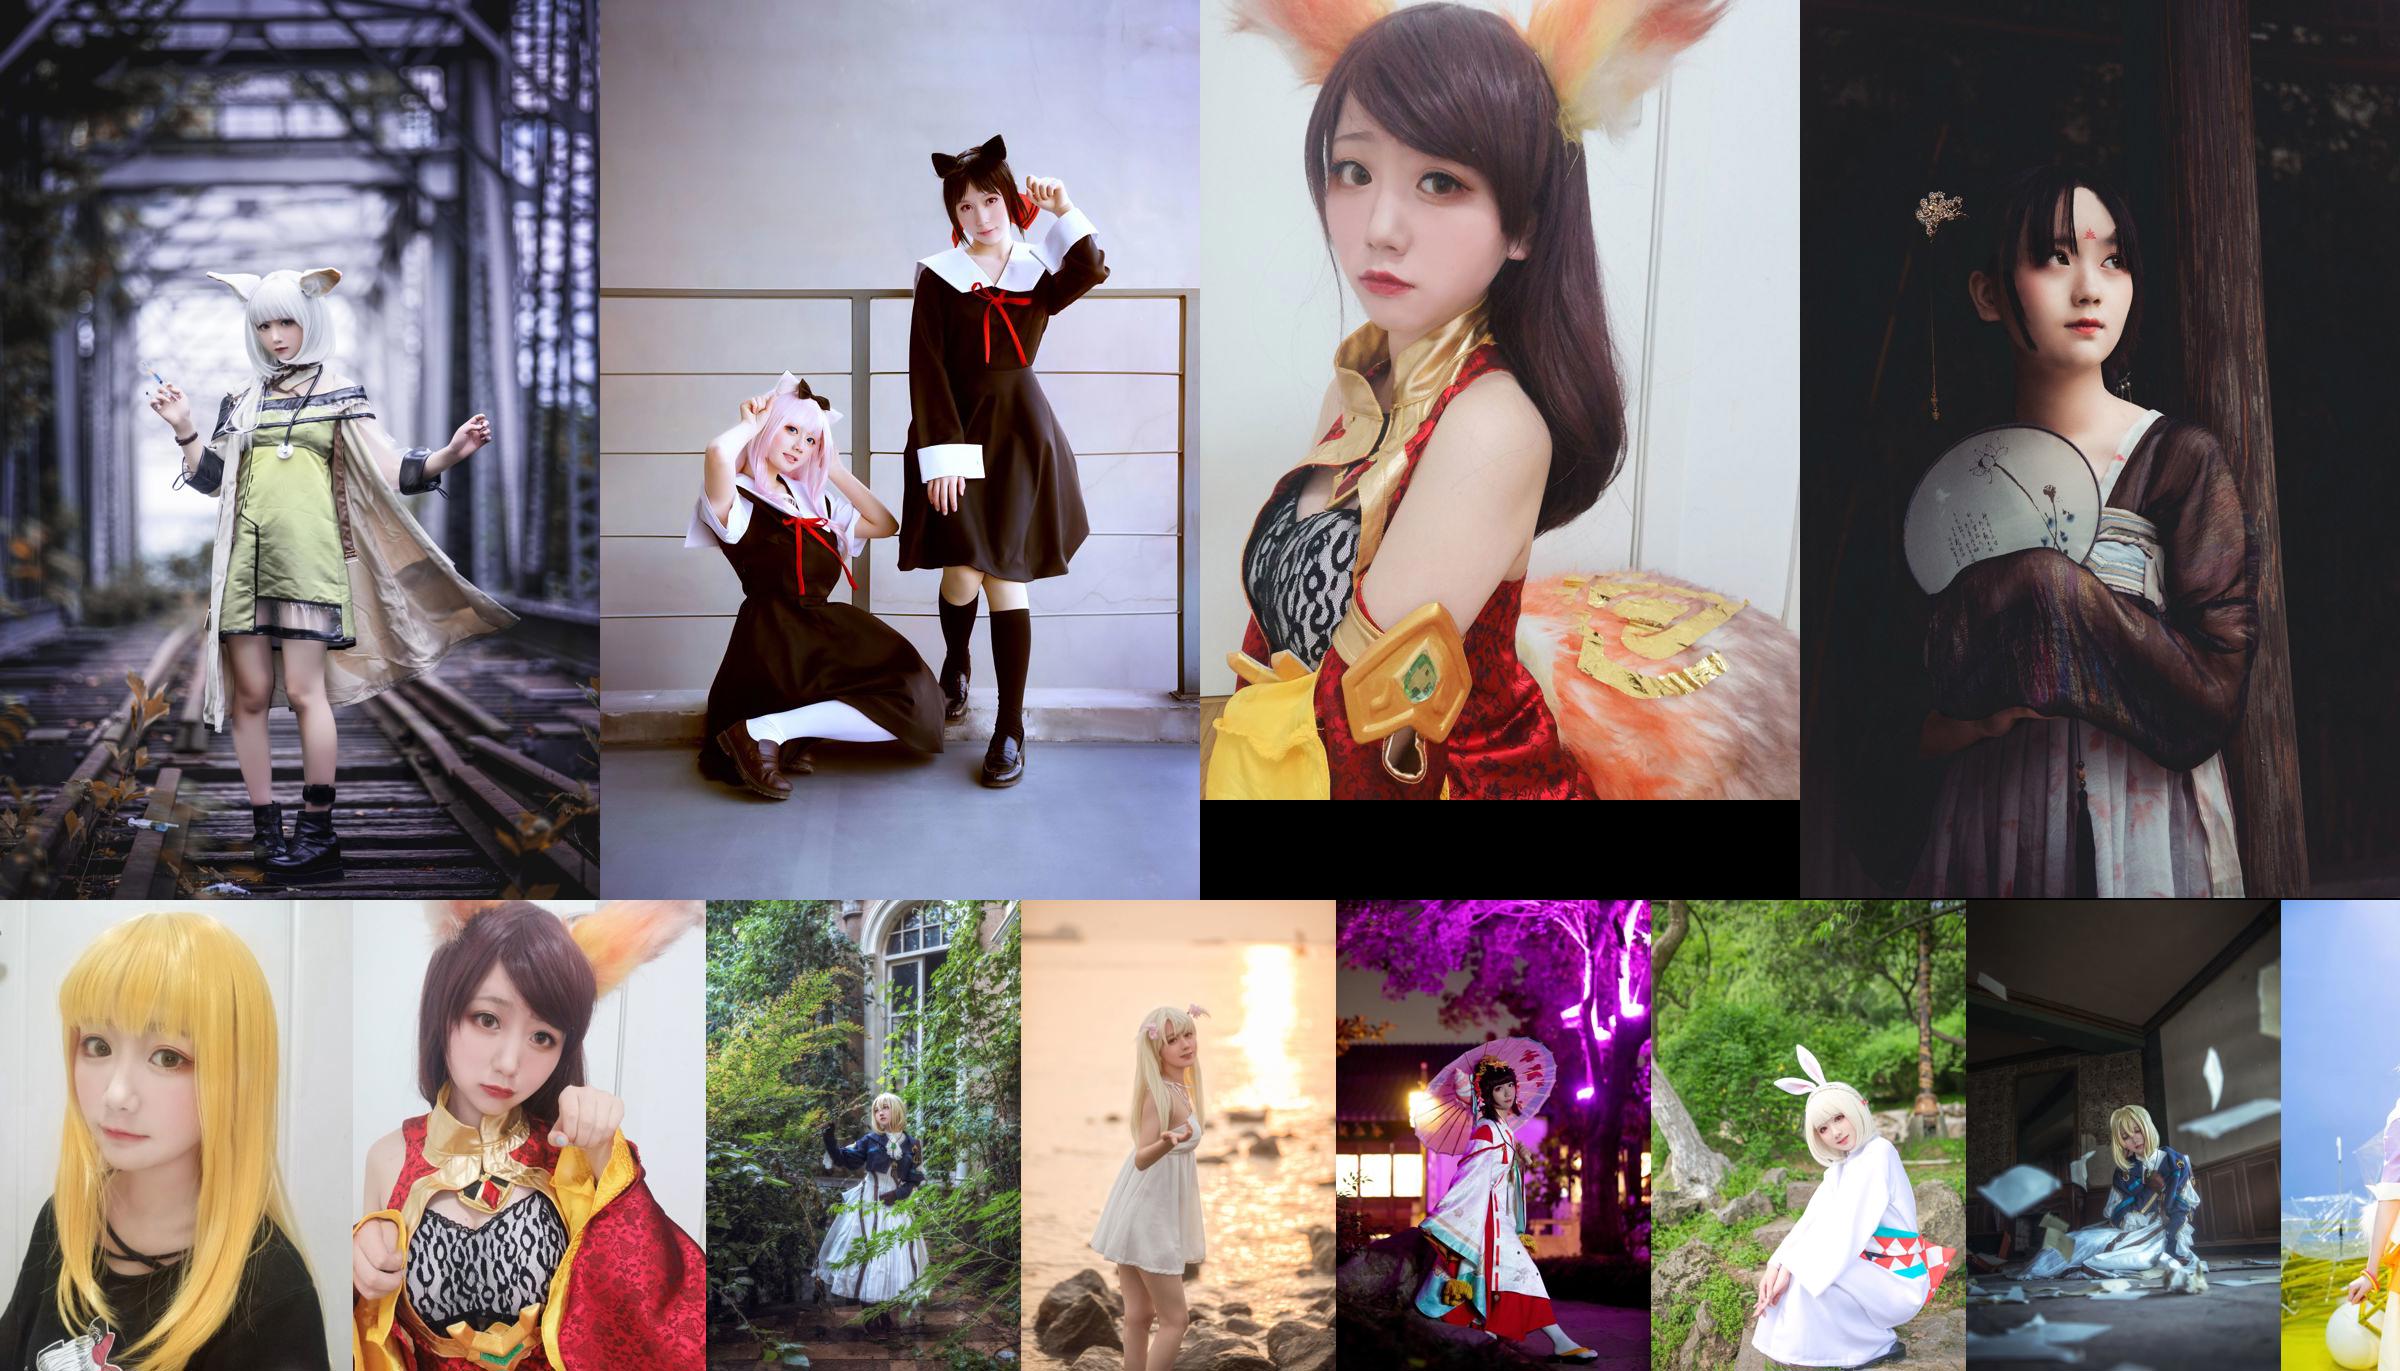 [COS Welfare] Anime blogger Xianyin sic - Miss Kaguya wants me to confess No.ab762f Page 3